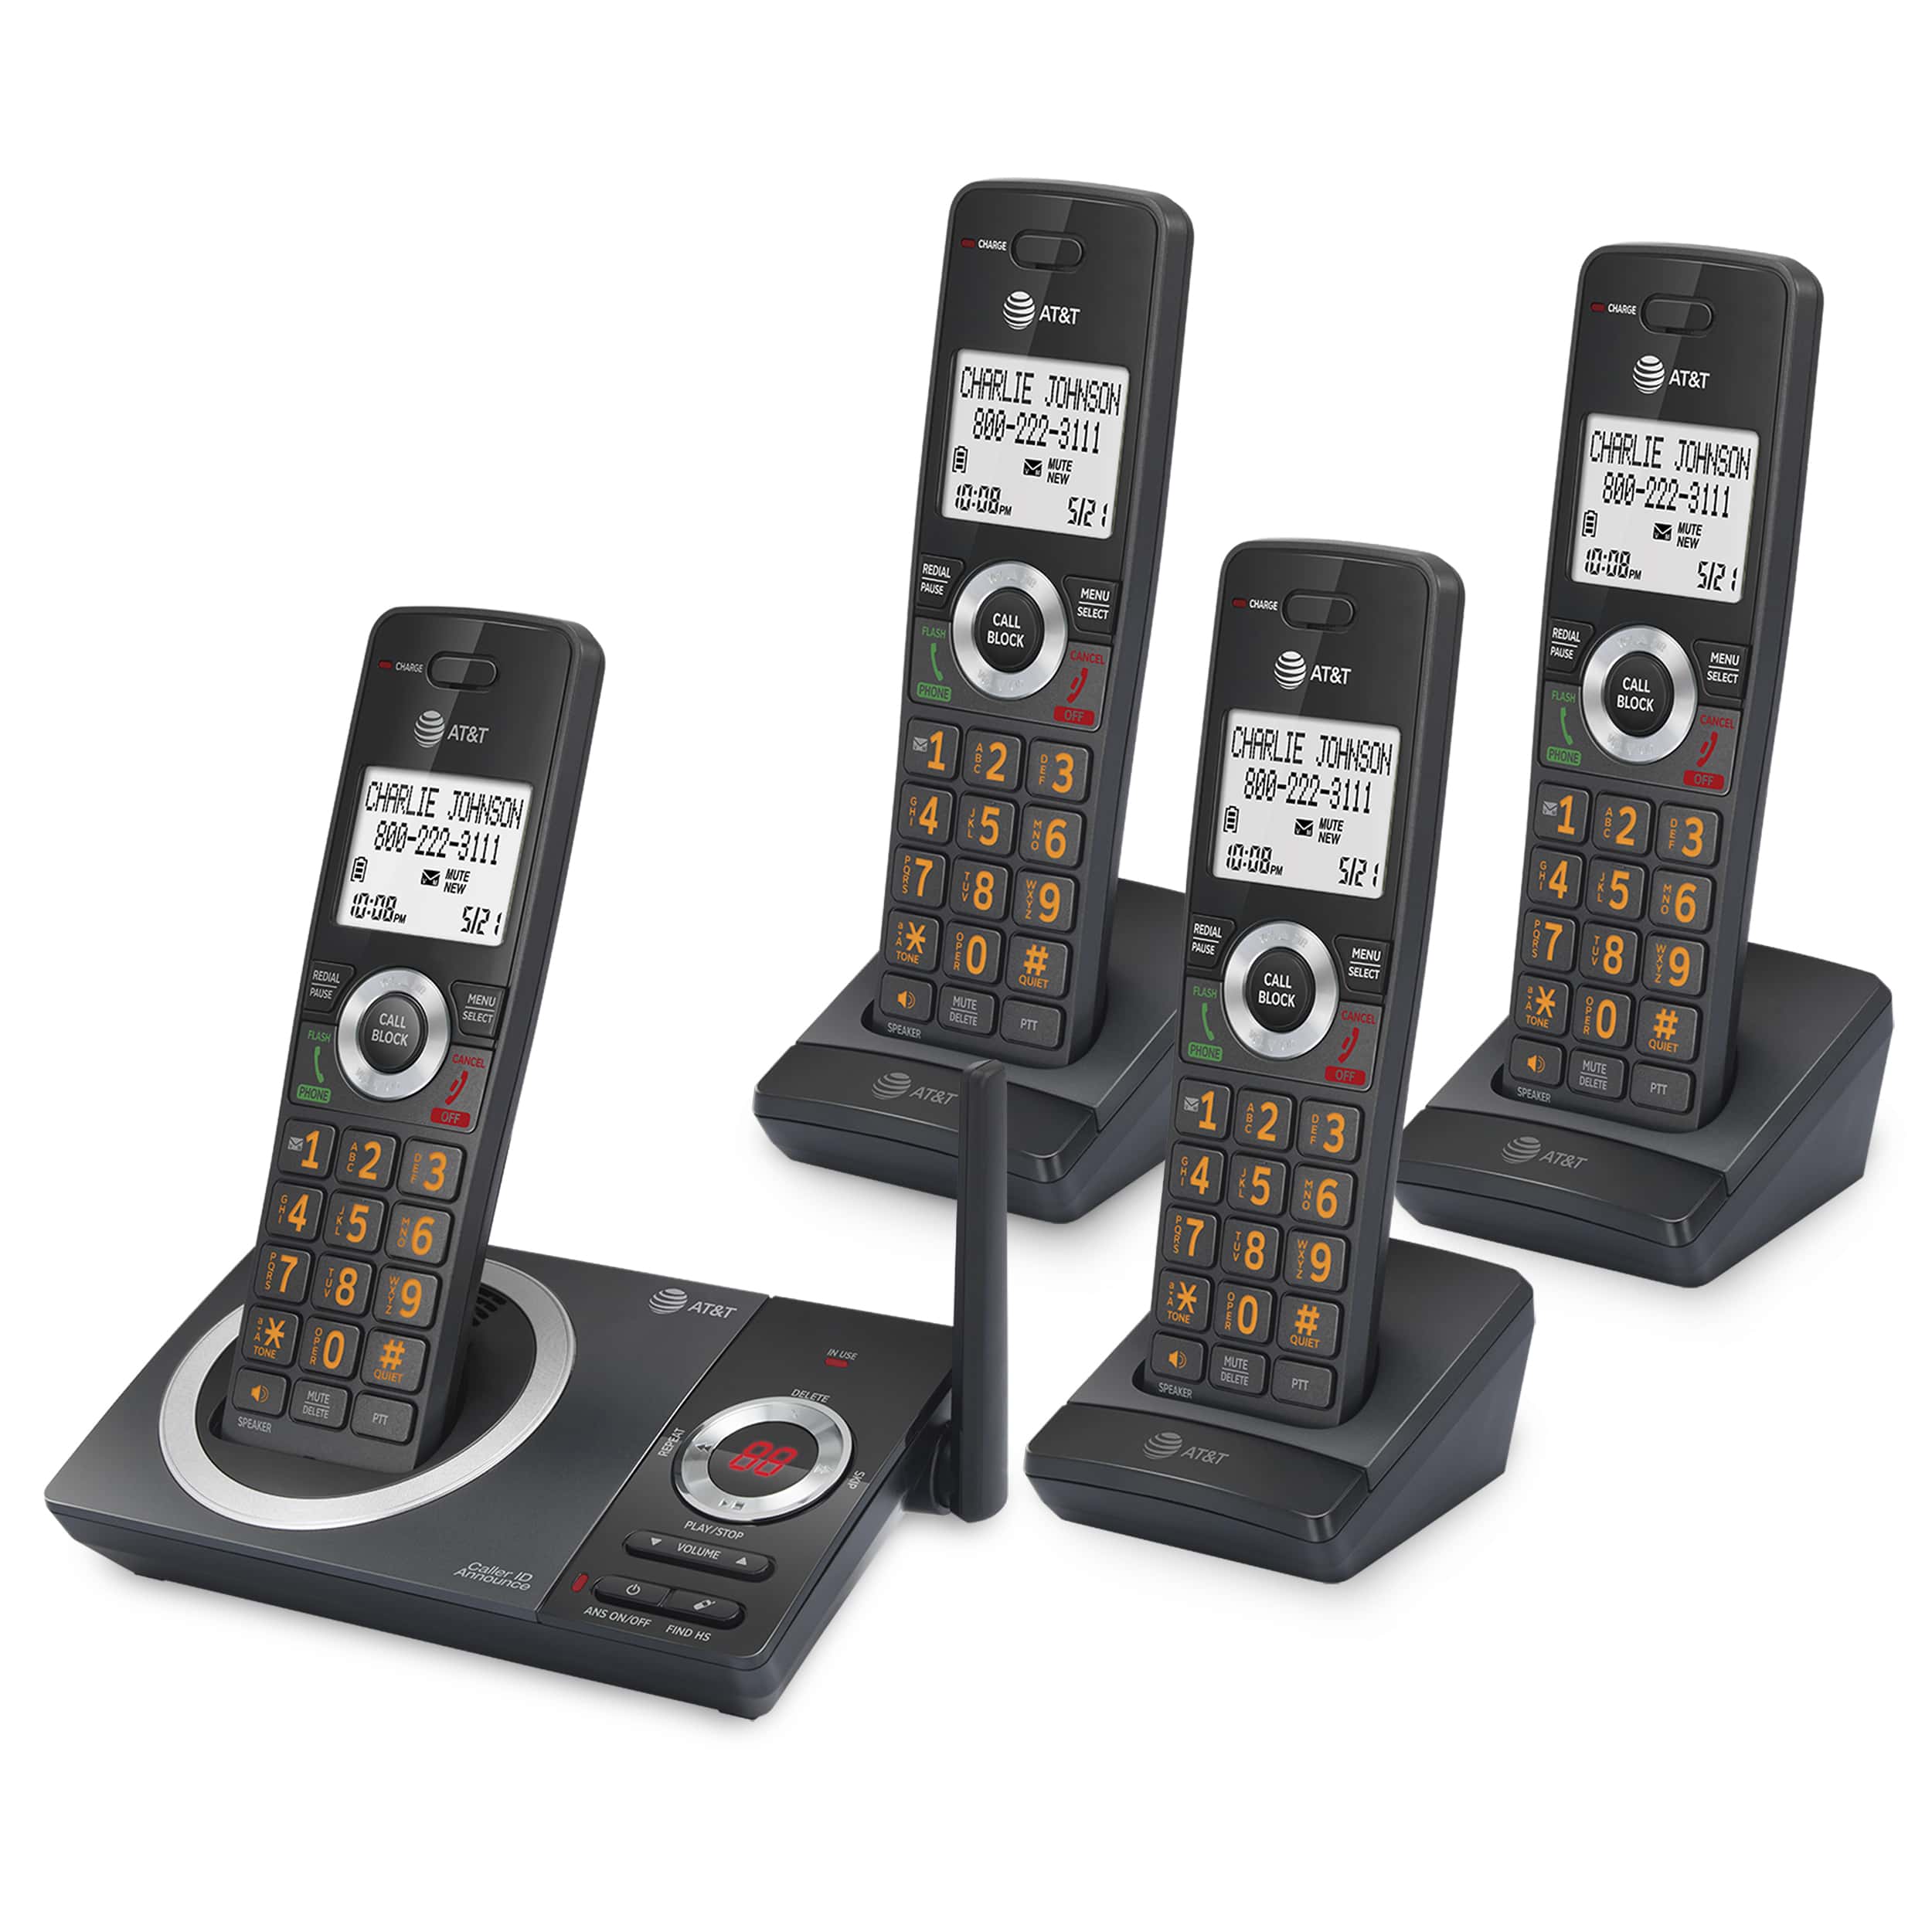 3-Handset Expandable Cordless Phone with Unsurpassed Range, Smart Call Blocker and Answering System - view 2